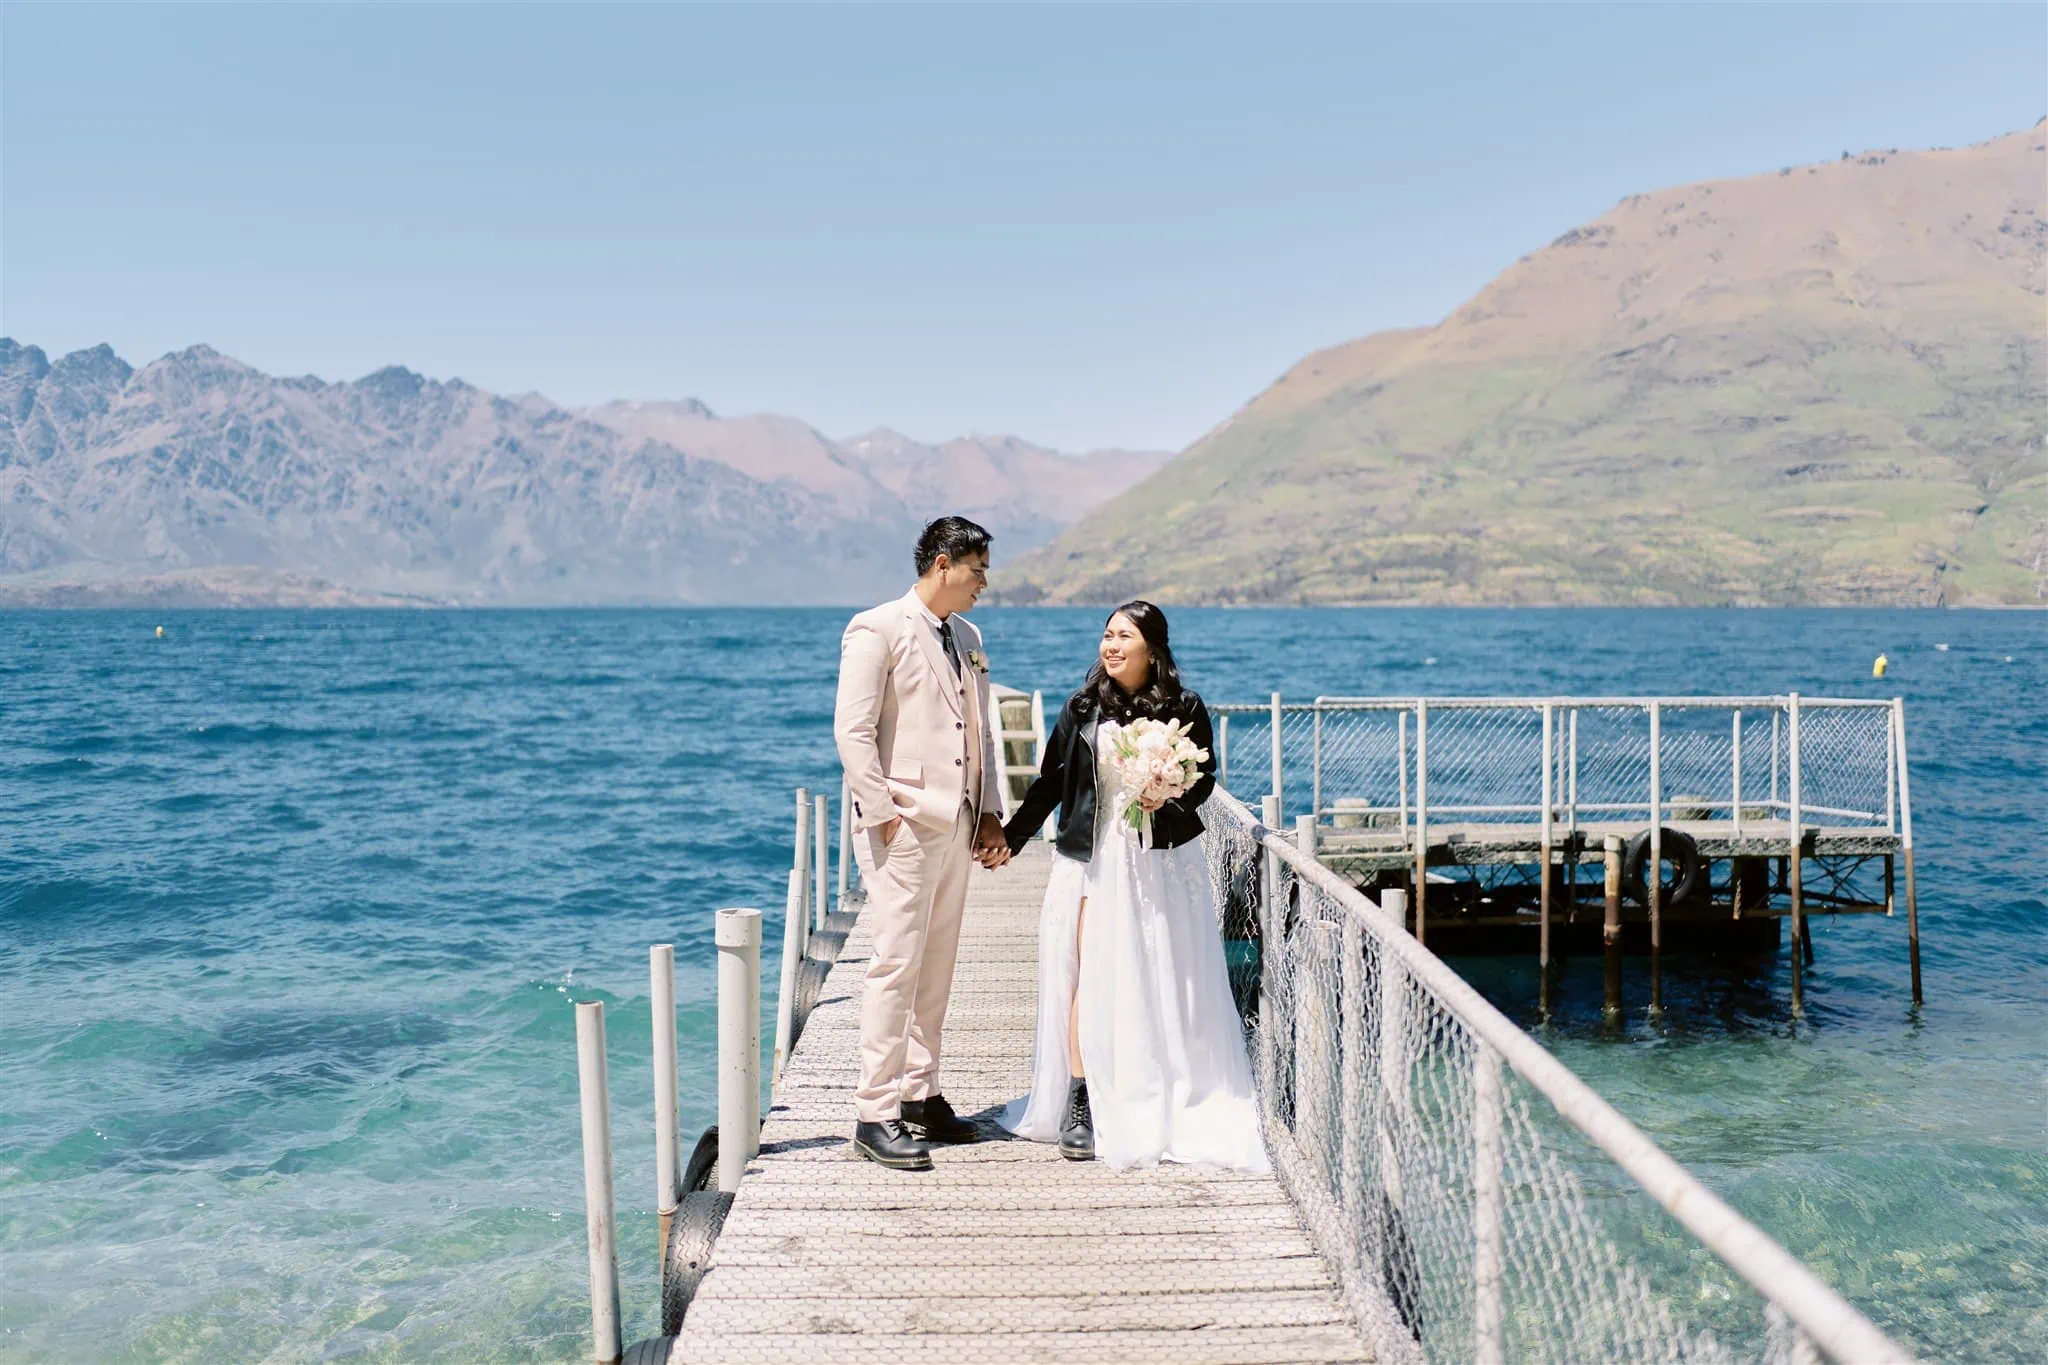 Queenstown Elopement Heli Wedding Photographer クイーンズタウン結婚式 | A Queenstown elopement with a bride and groom standing on a dock, framed by majestic mountains.